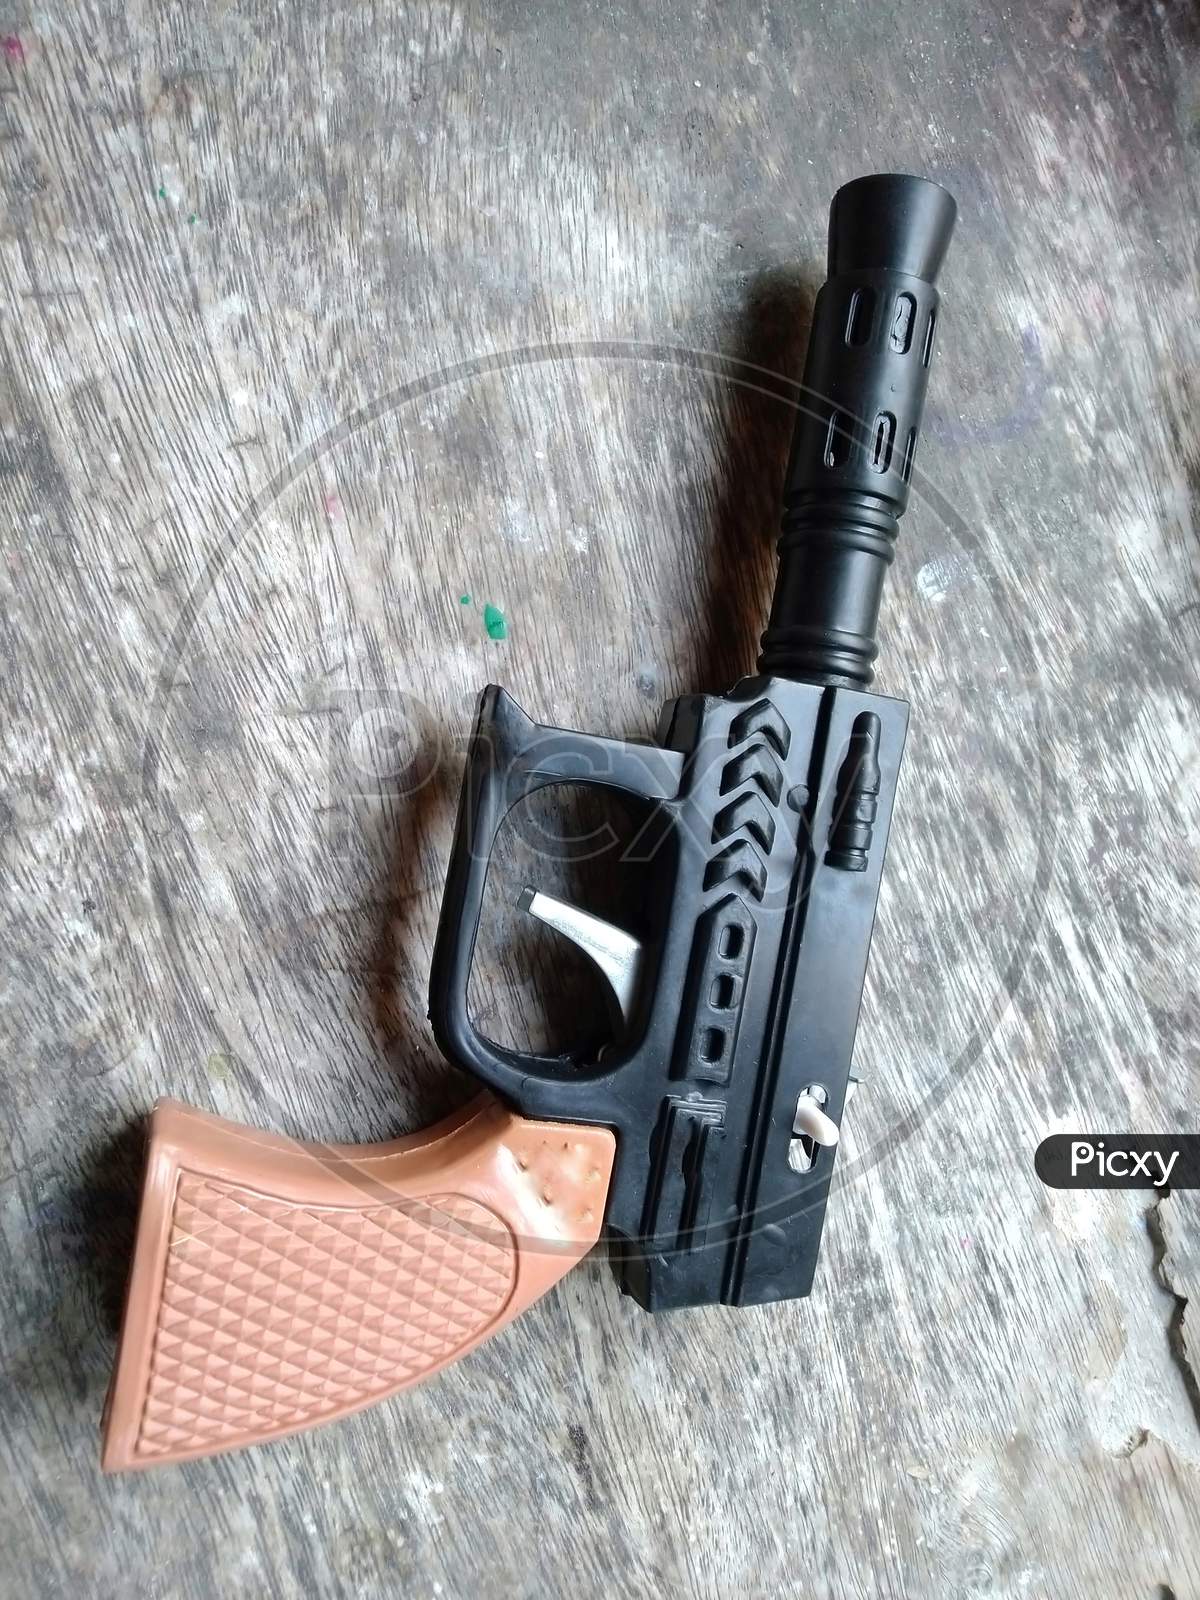 A close view of baby toy gun